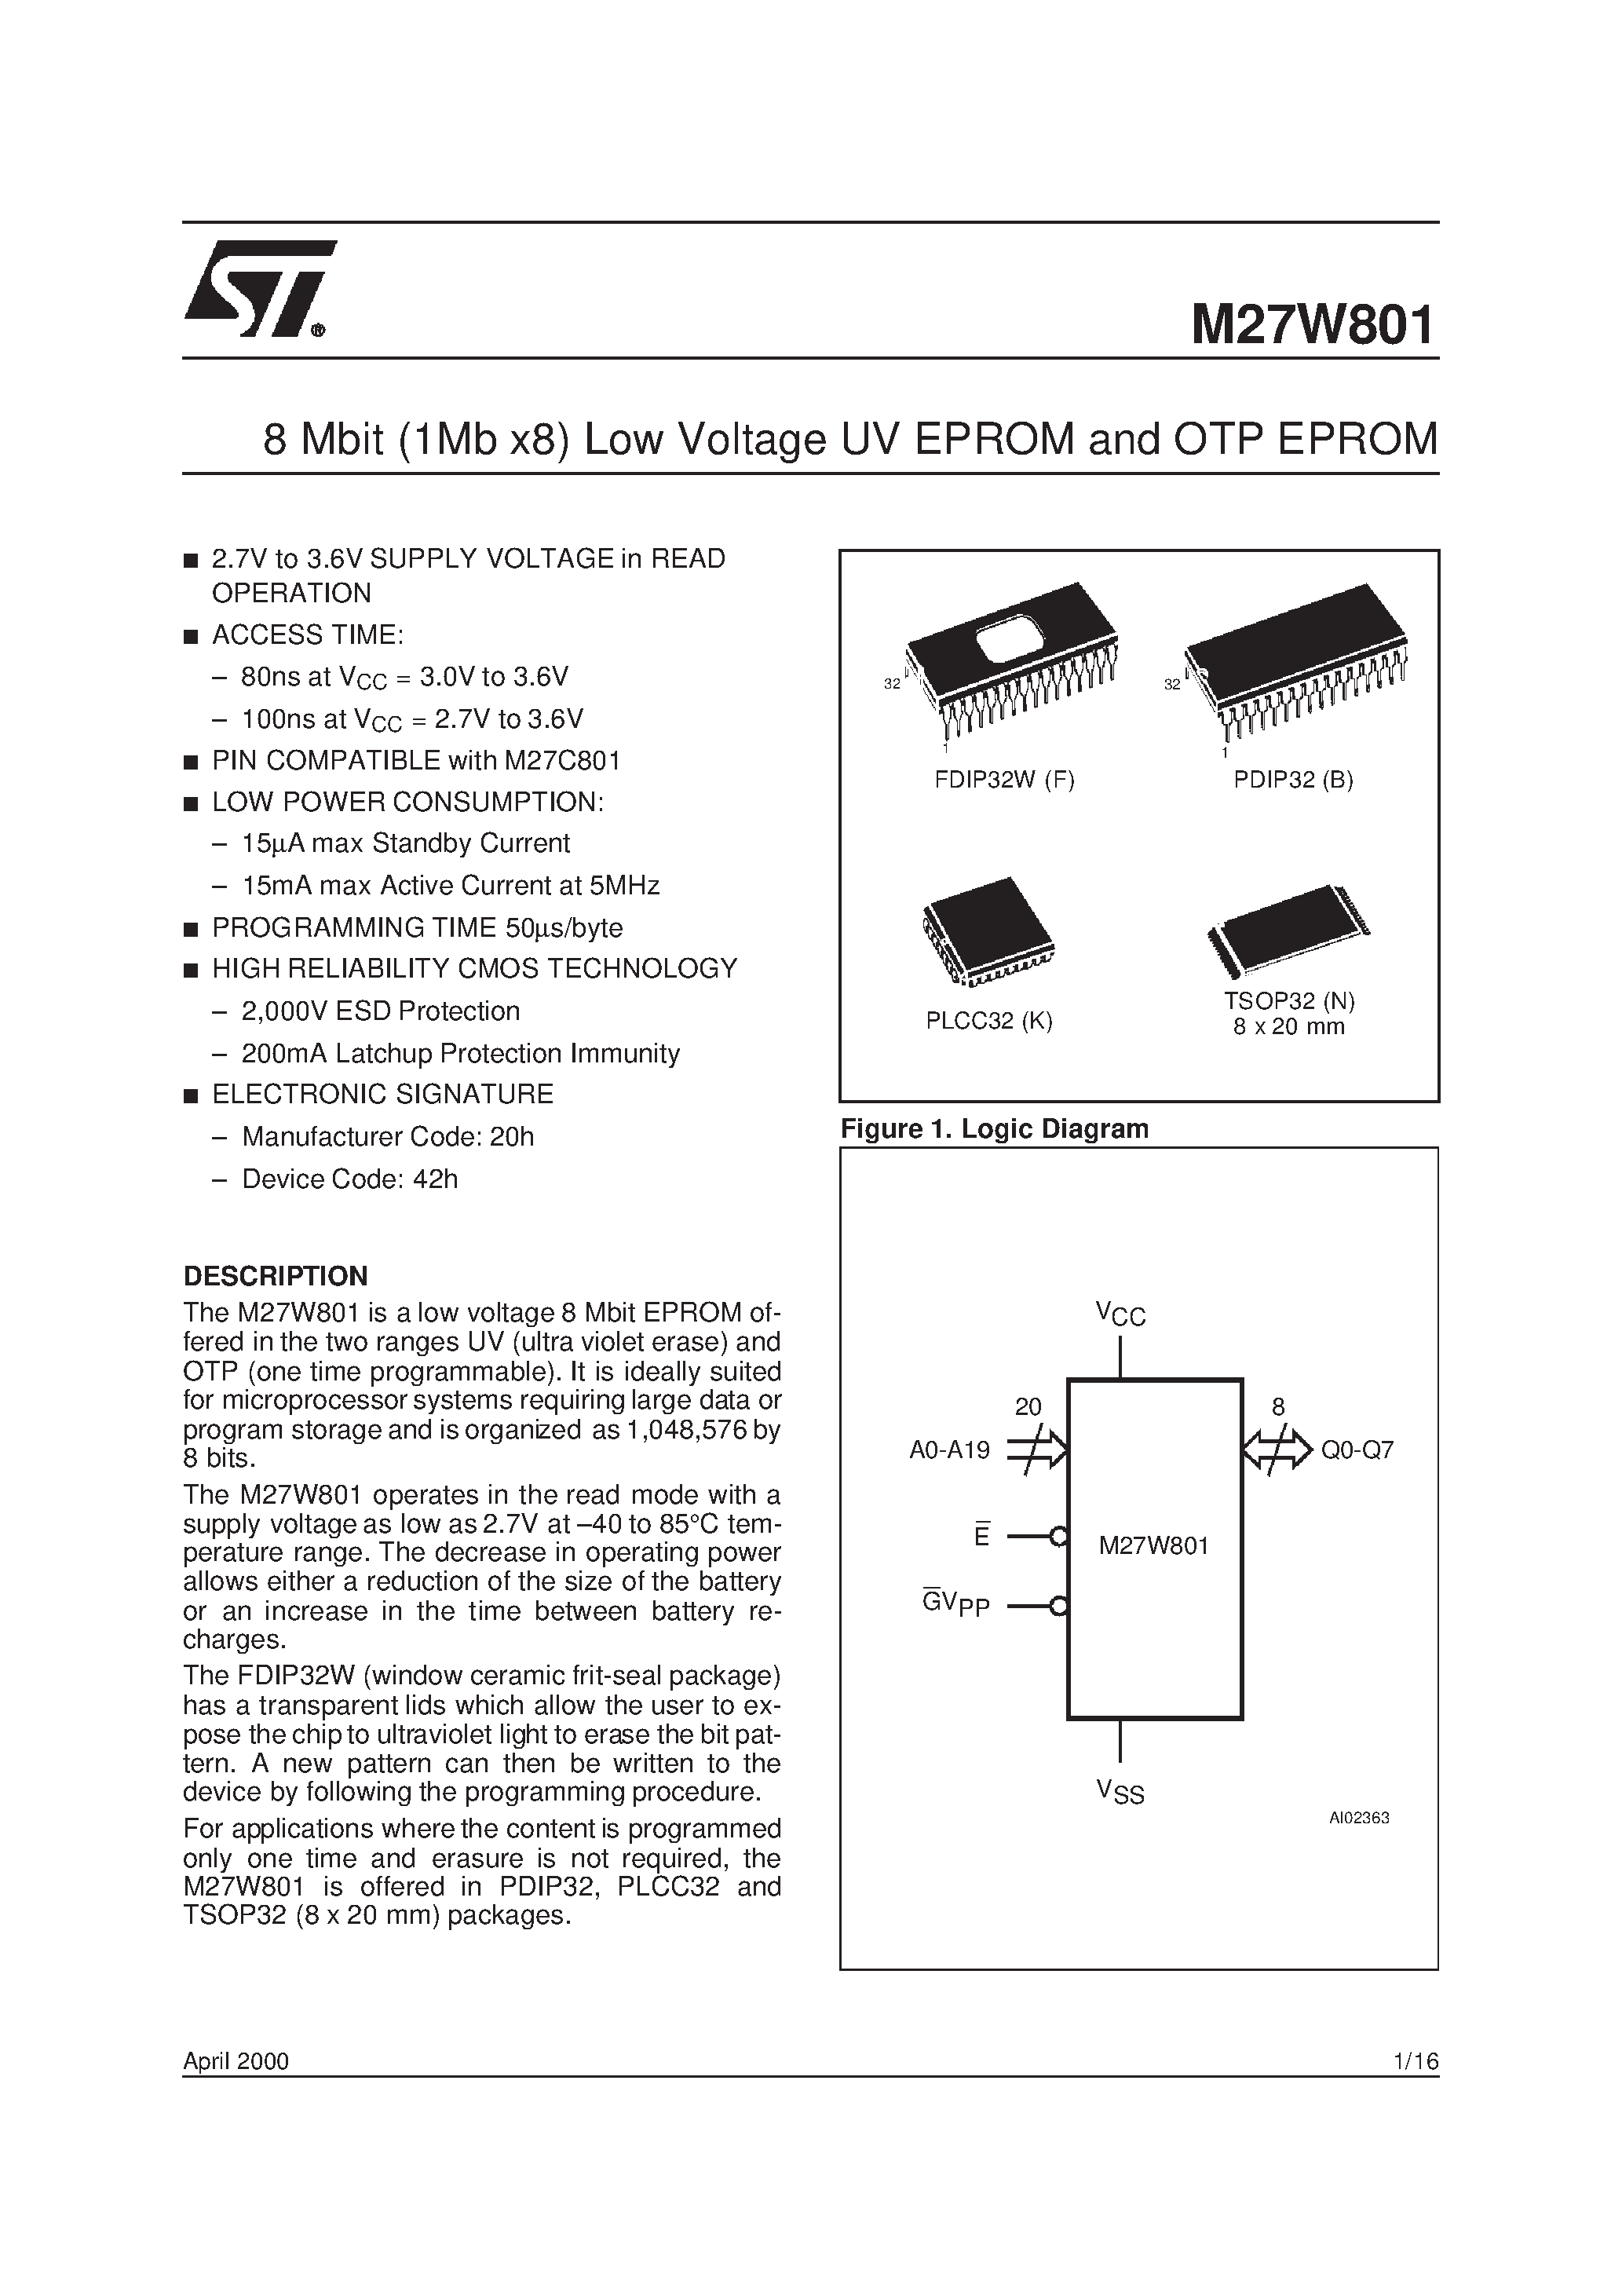 Datasheet M27W801-200K6TR - 8 Mbit 1Mb x8 Low Voltage UV EPROM and OTP EPROM page 1